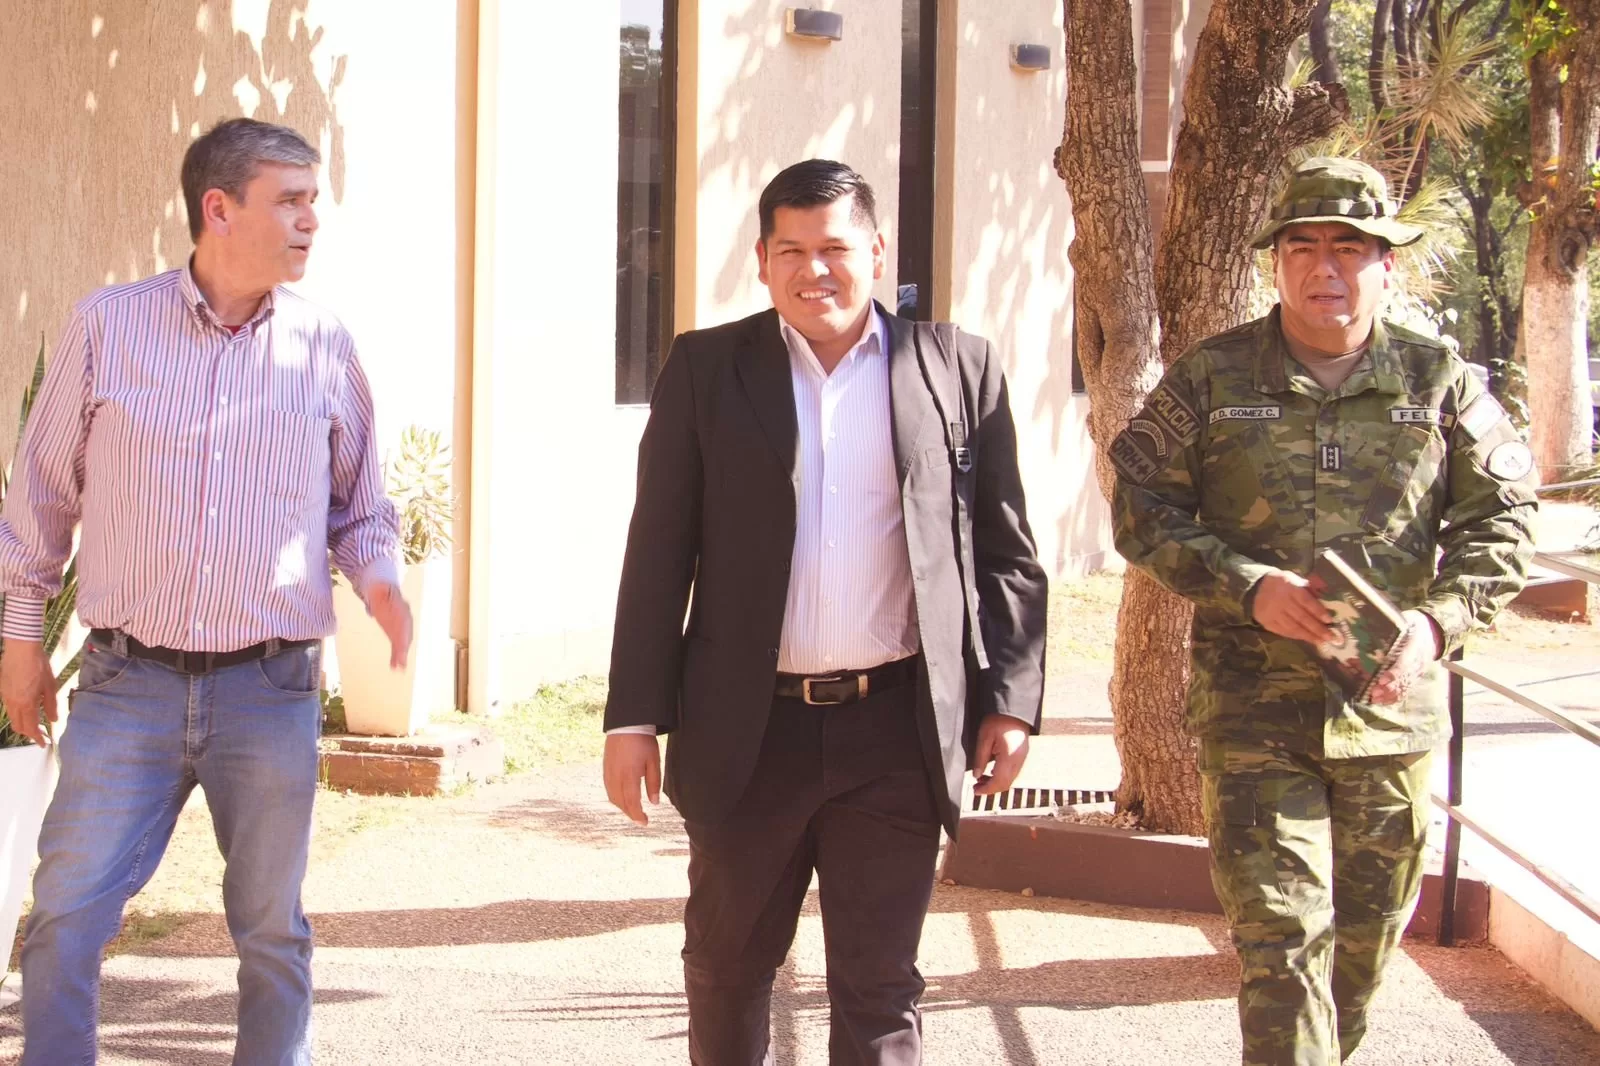 Bolivia and Paraguay join forces to find Marset: "He is cornered"
